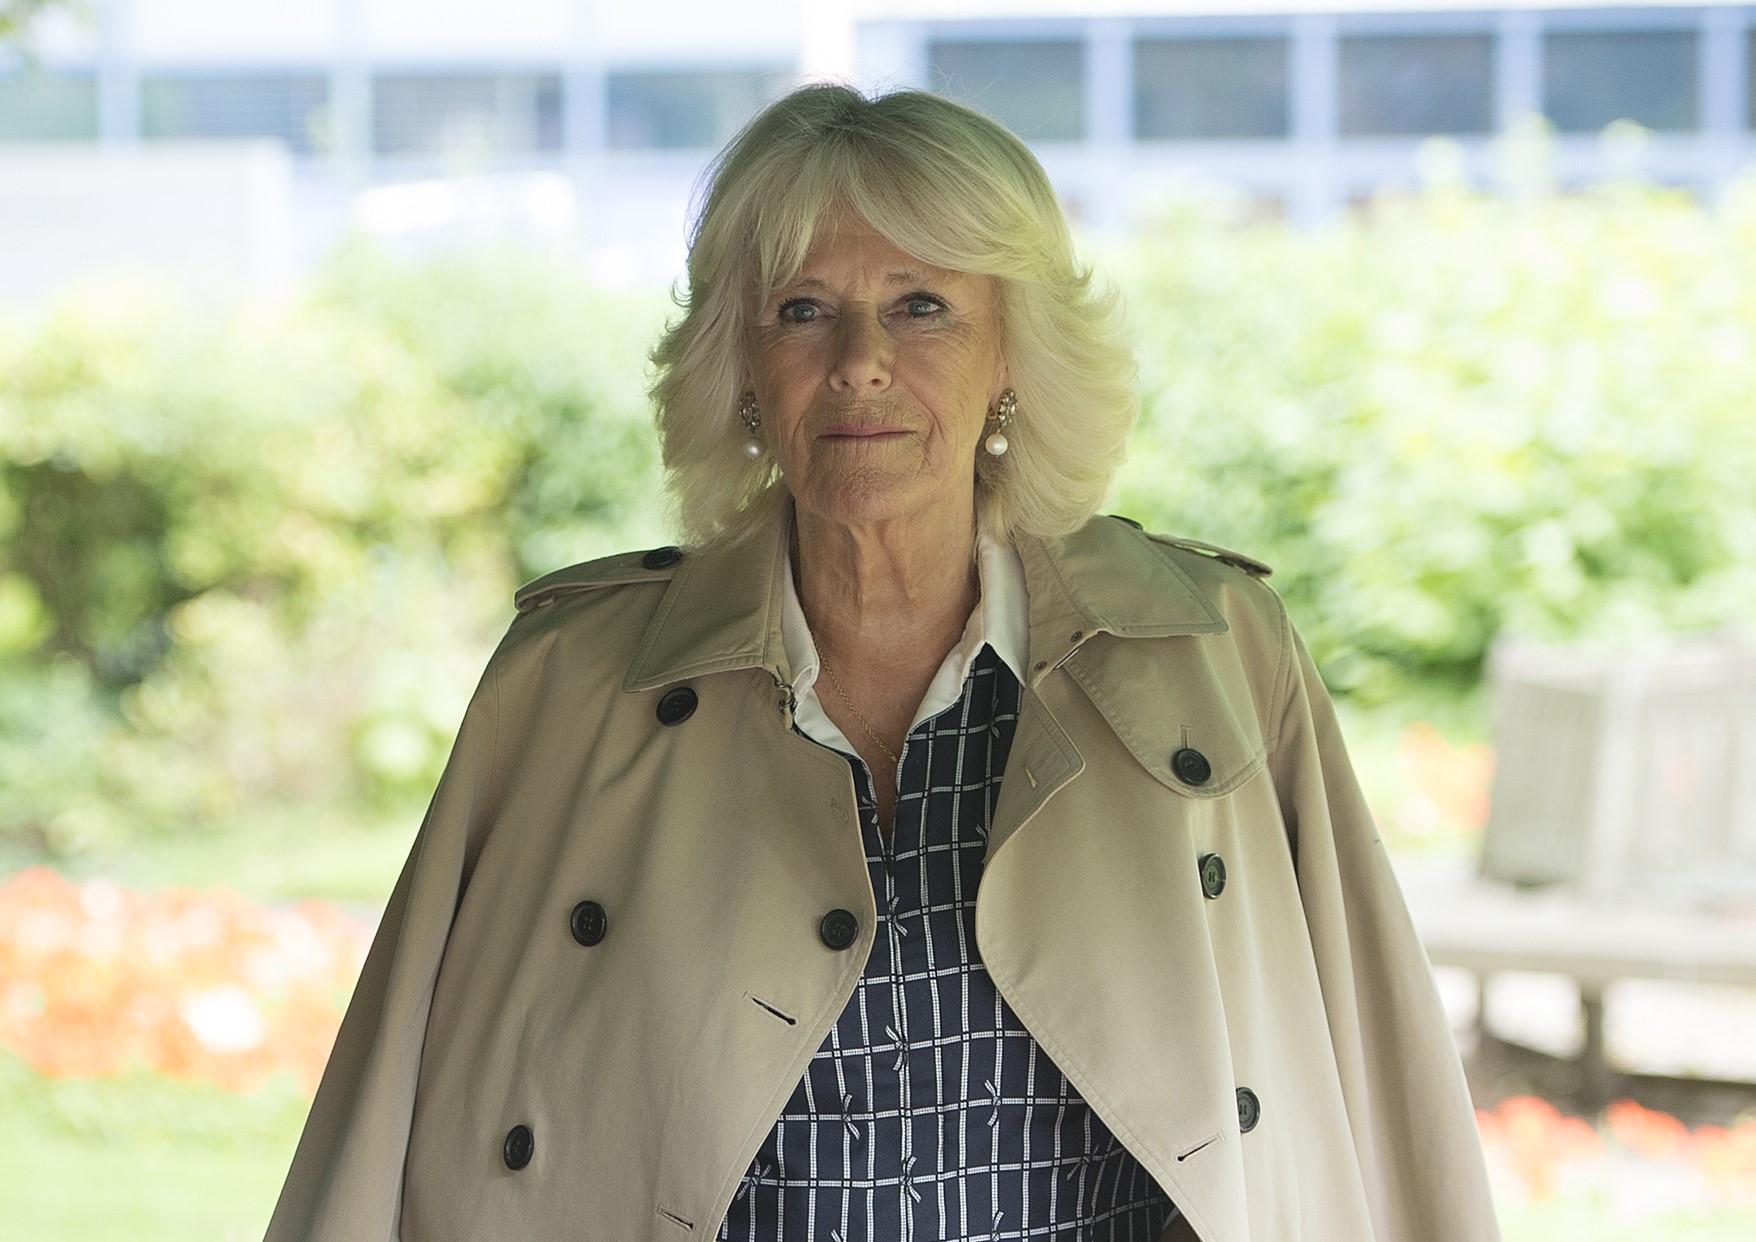 Camilla Parker Bowles, who once bought a home in Wiltshire to be closer to Prince Charles, visits Swindon Borough Council Office Gardens